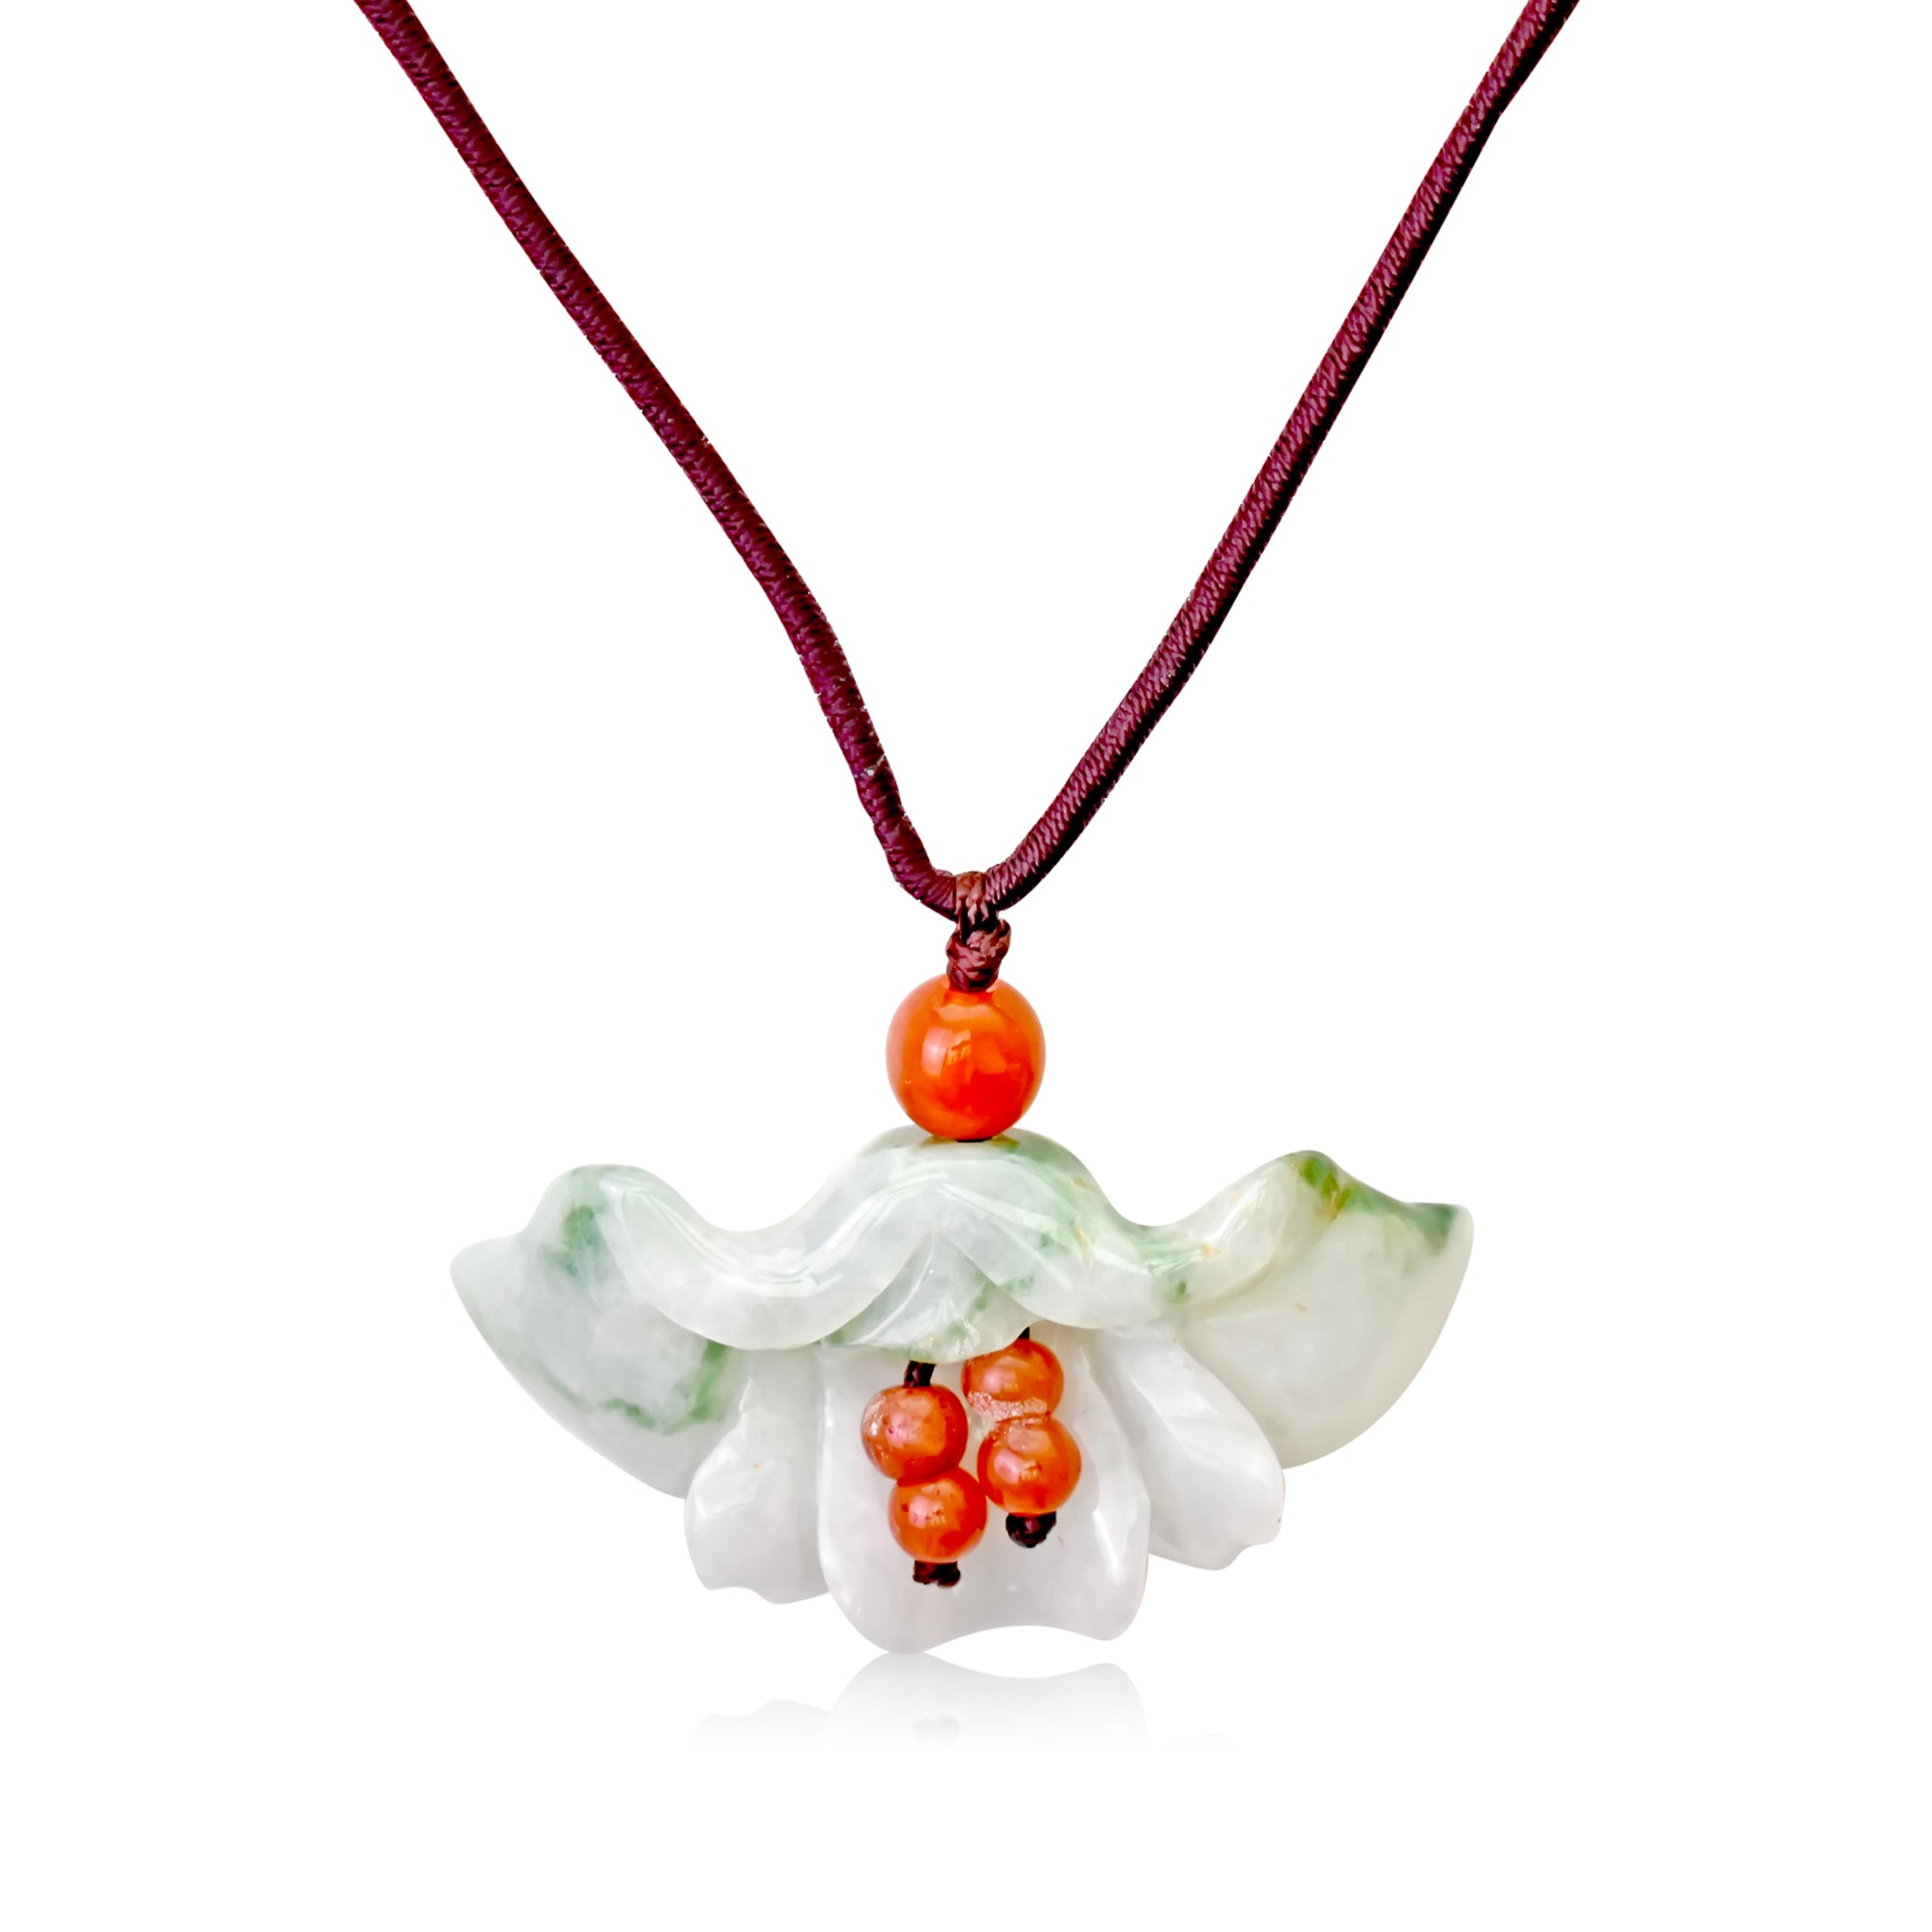 Find Grace and Elegance with a Firecracker Flower Necklace